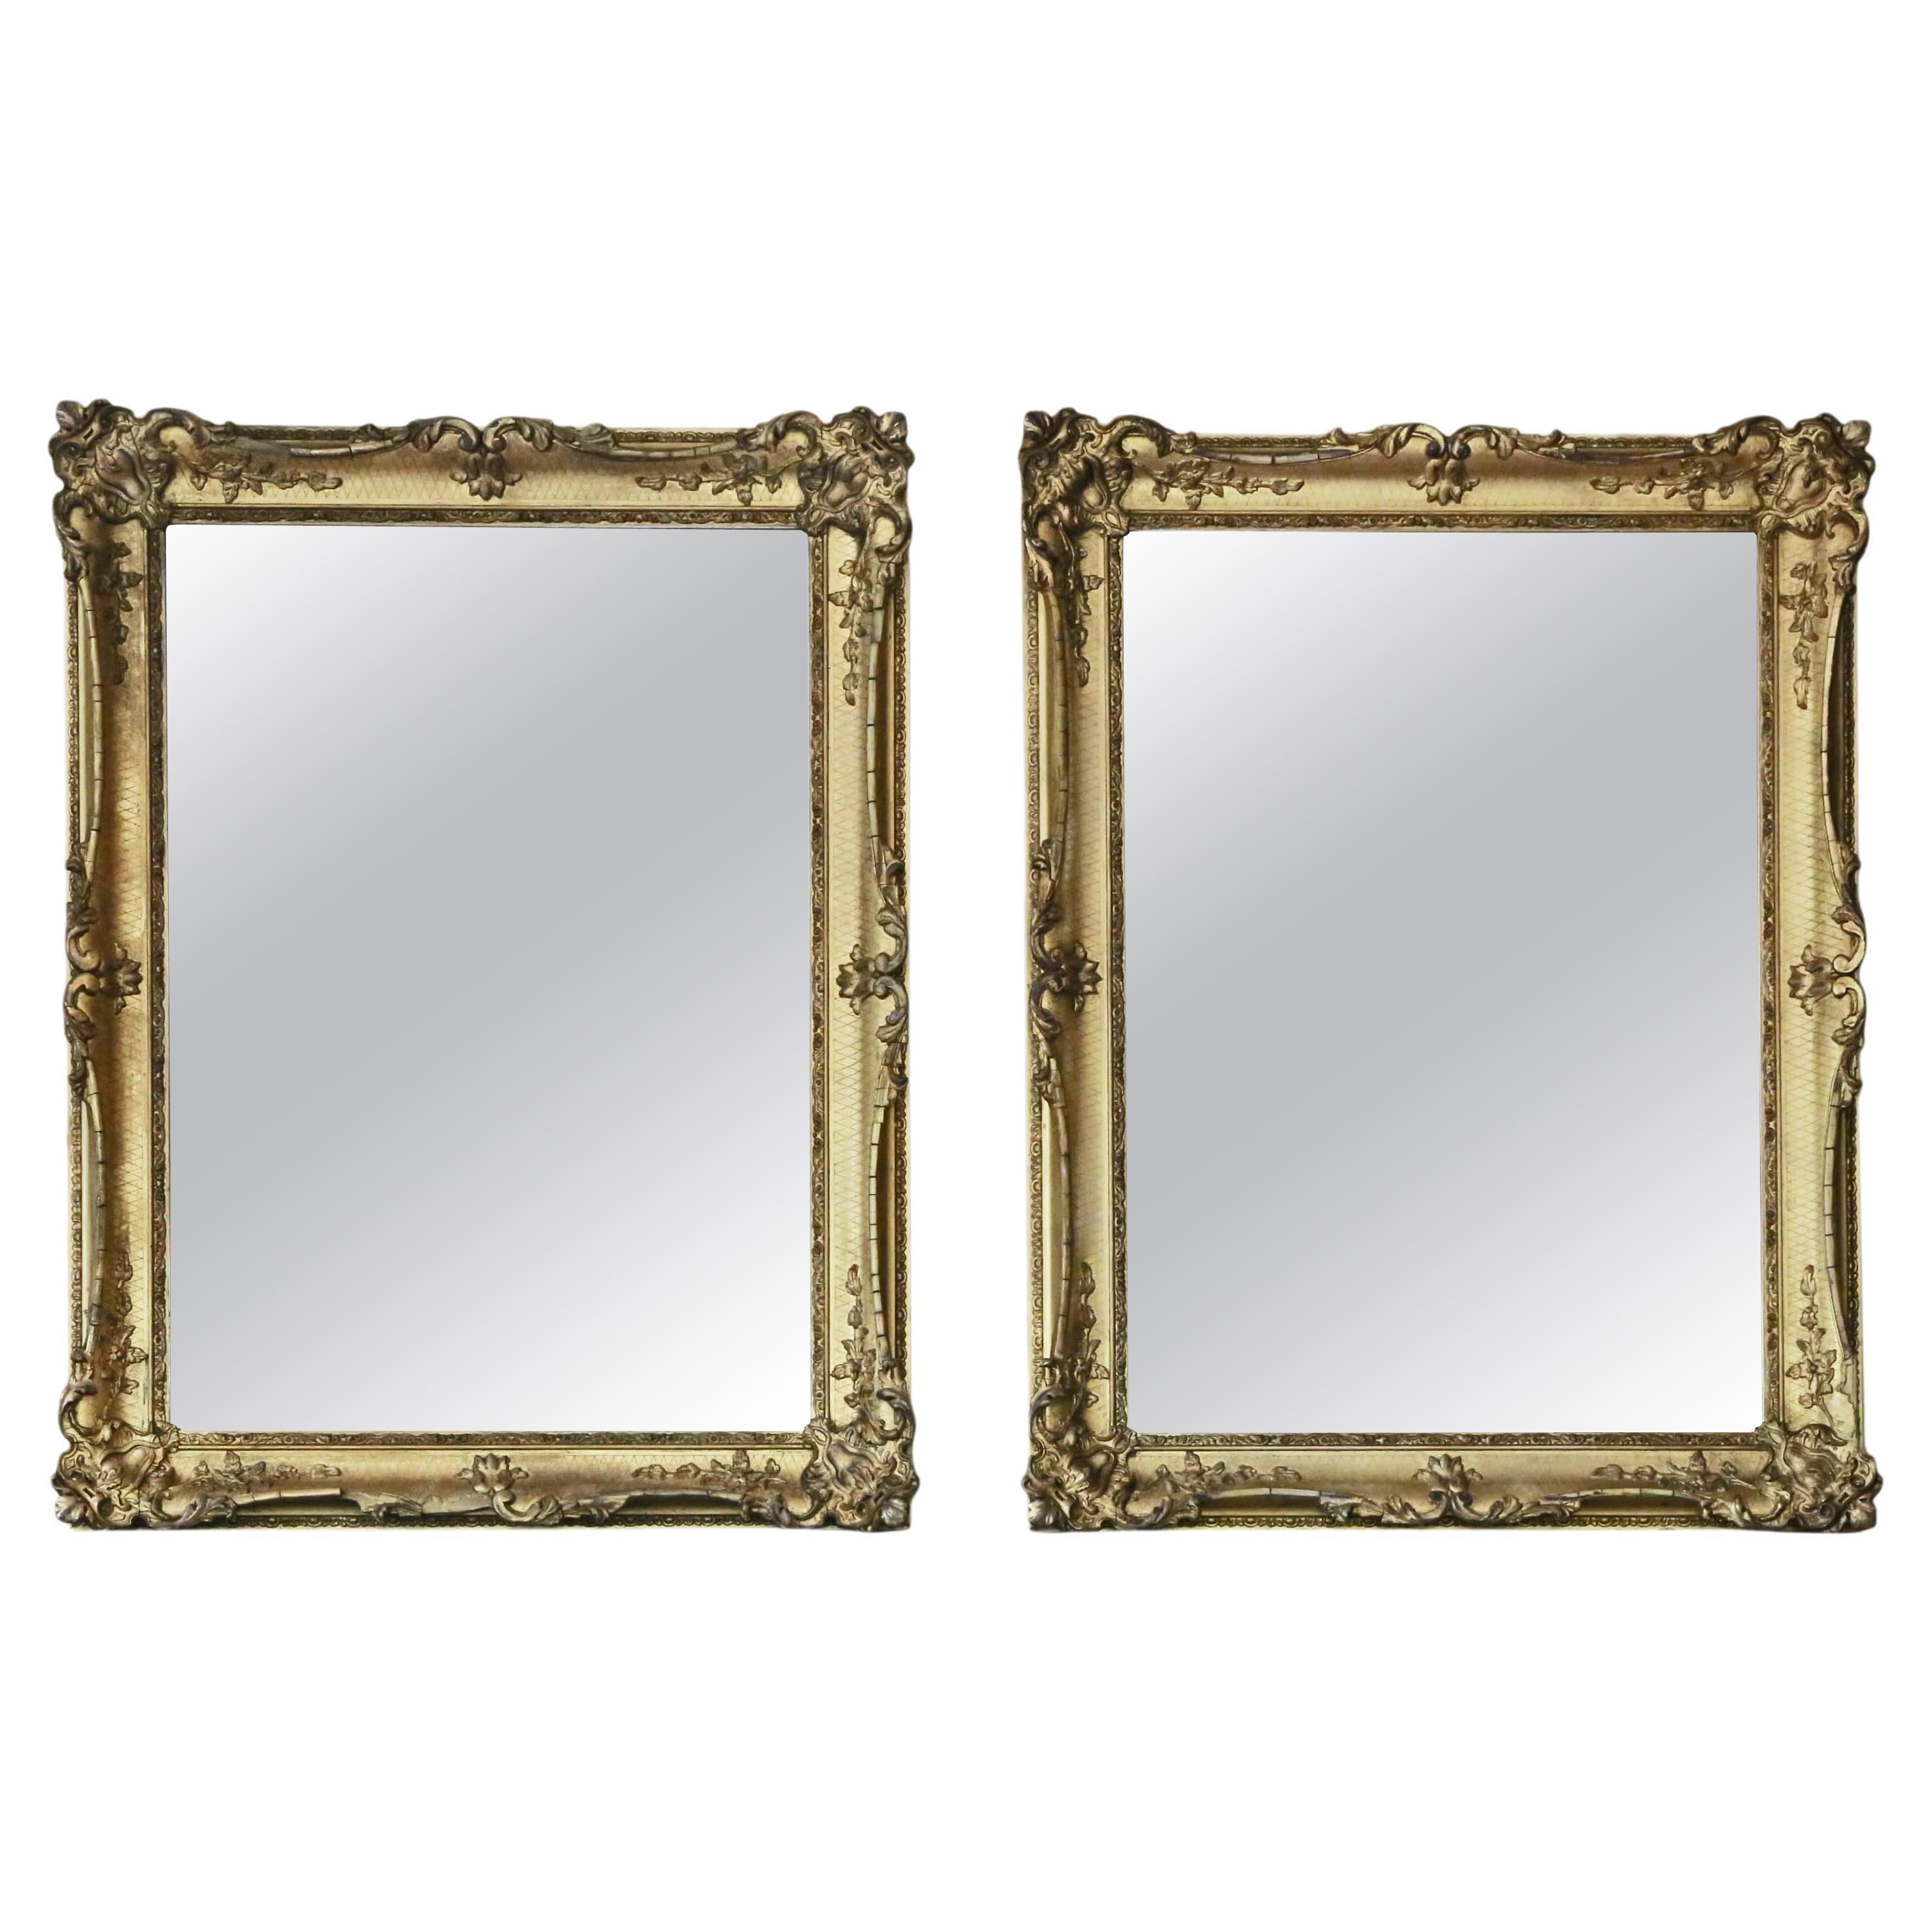 Antique Pair of Large Gilt Wall Overmantle Mirrors, 19th Century